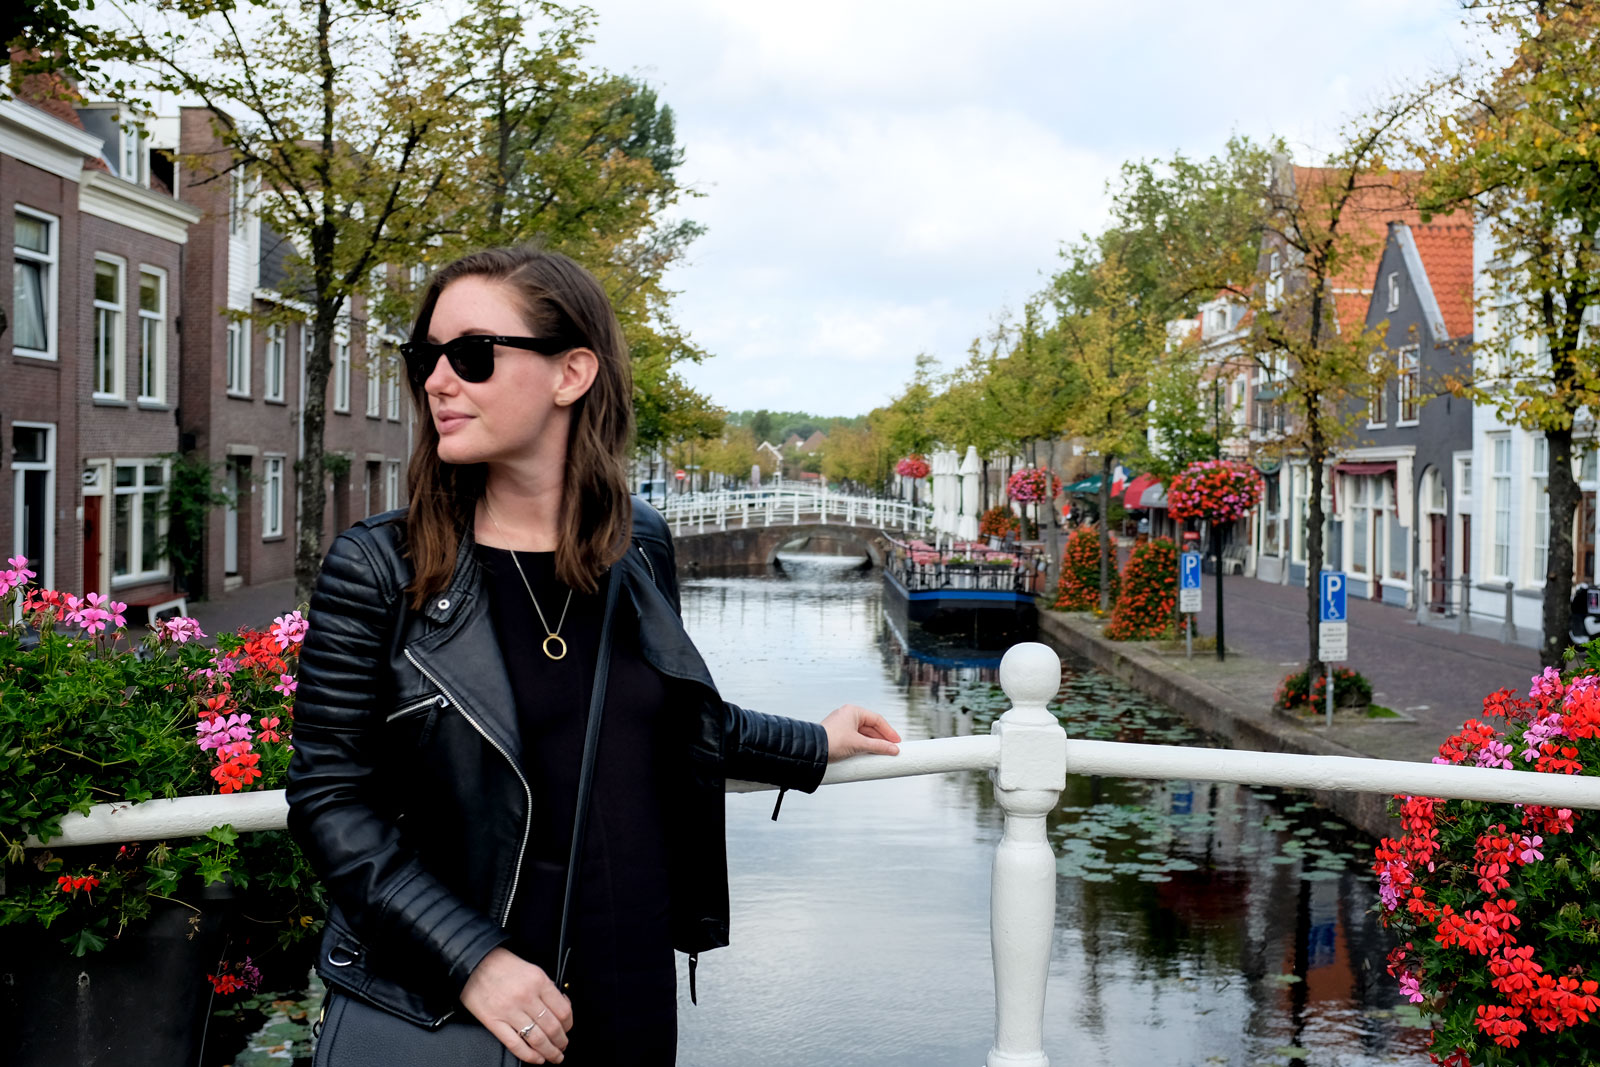 Alyssa poses alongside a canal in Delft